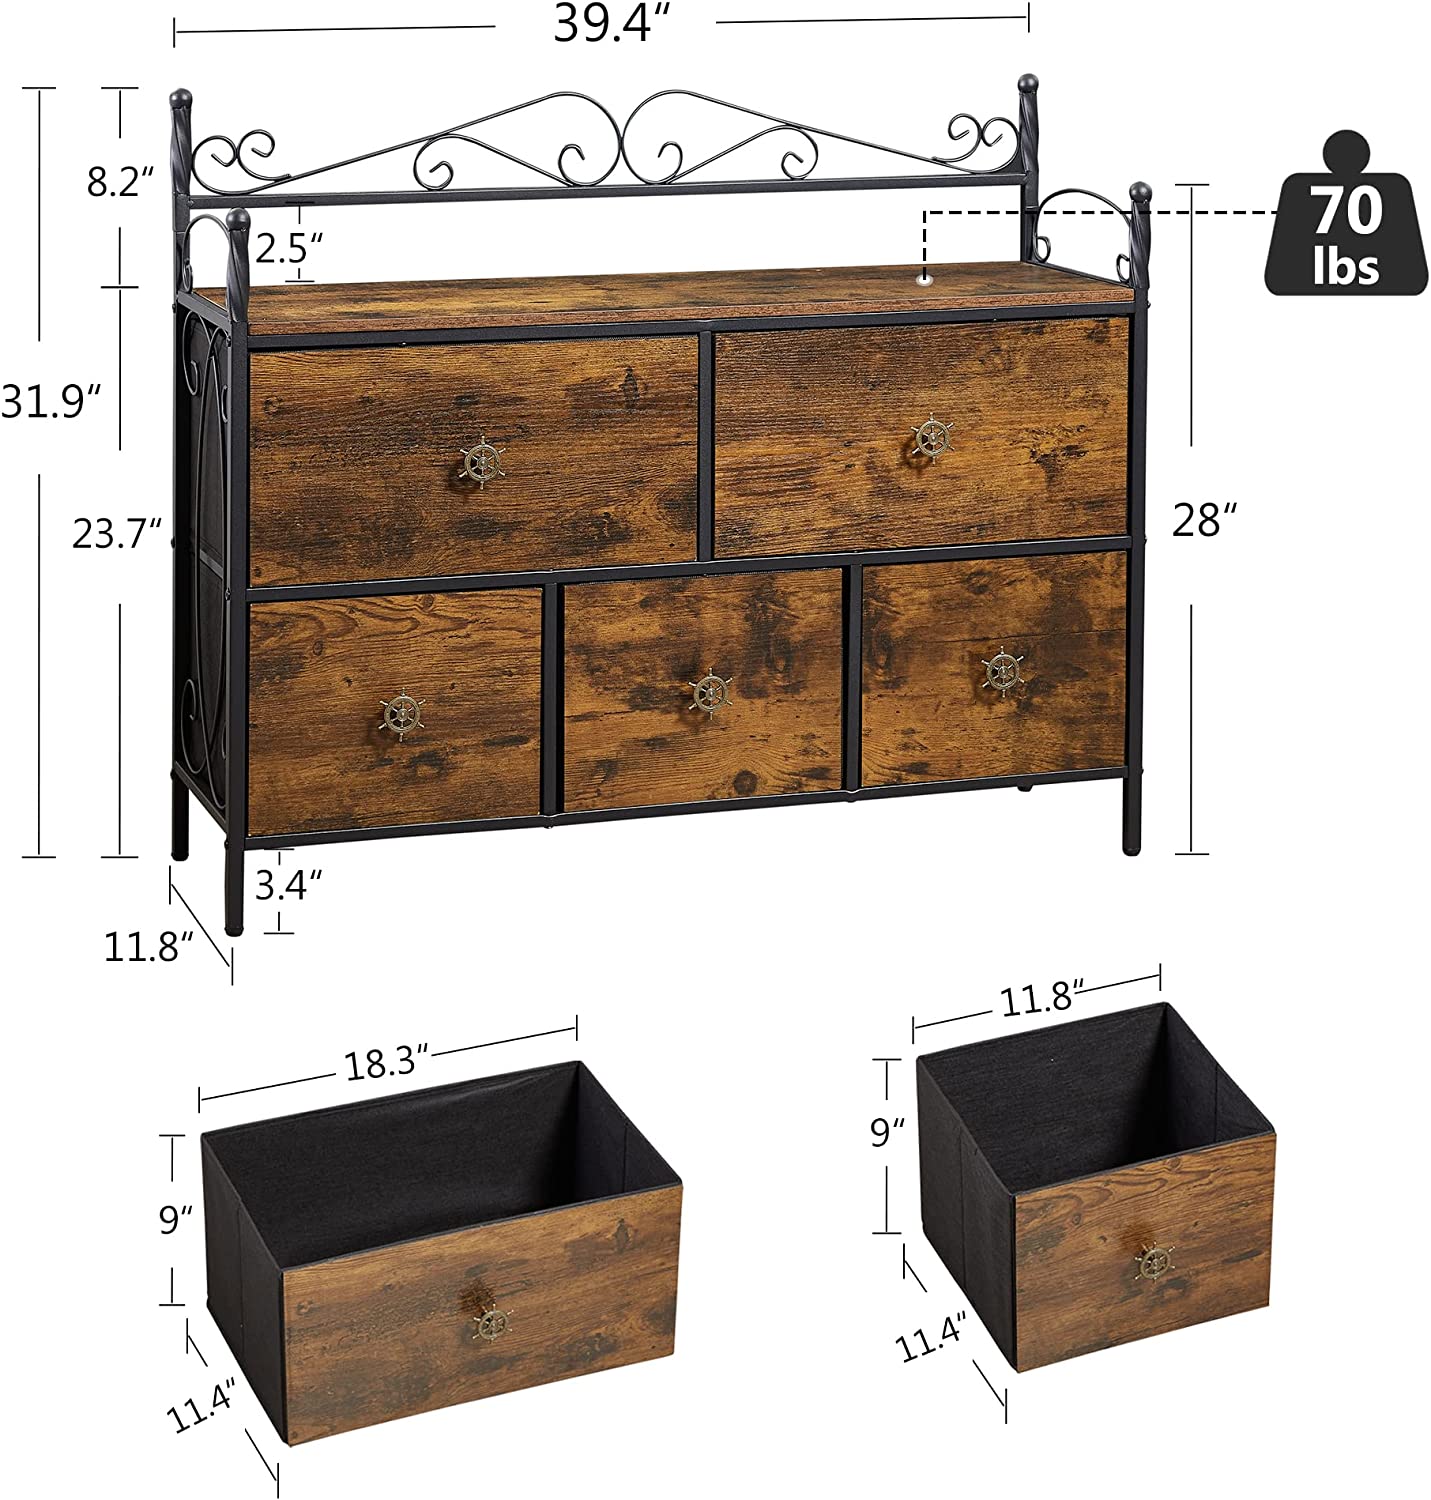 VECELO Dresser for Bedroom with 5 Drawers, Storage Organizer Unit with Shelf for Closet, Living Room